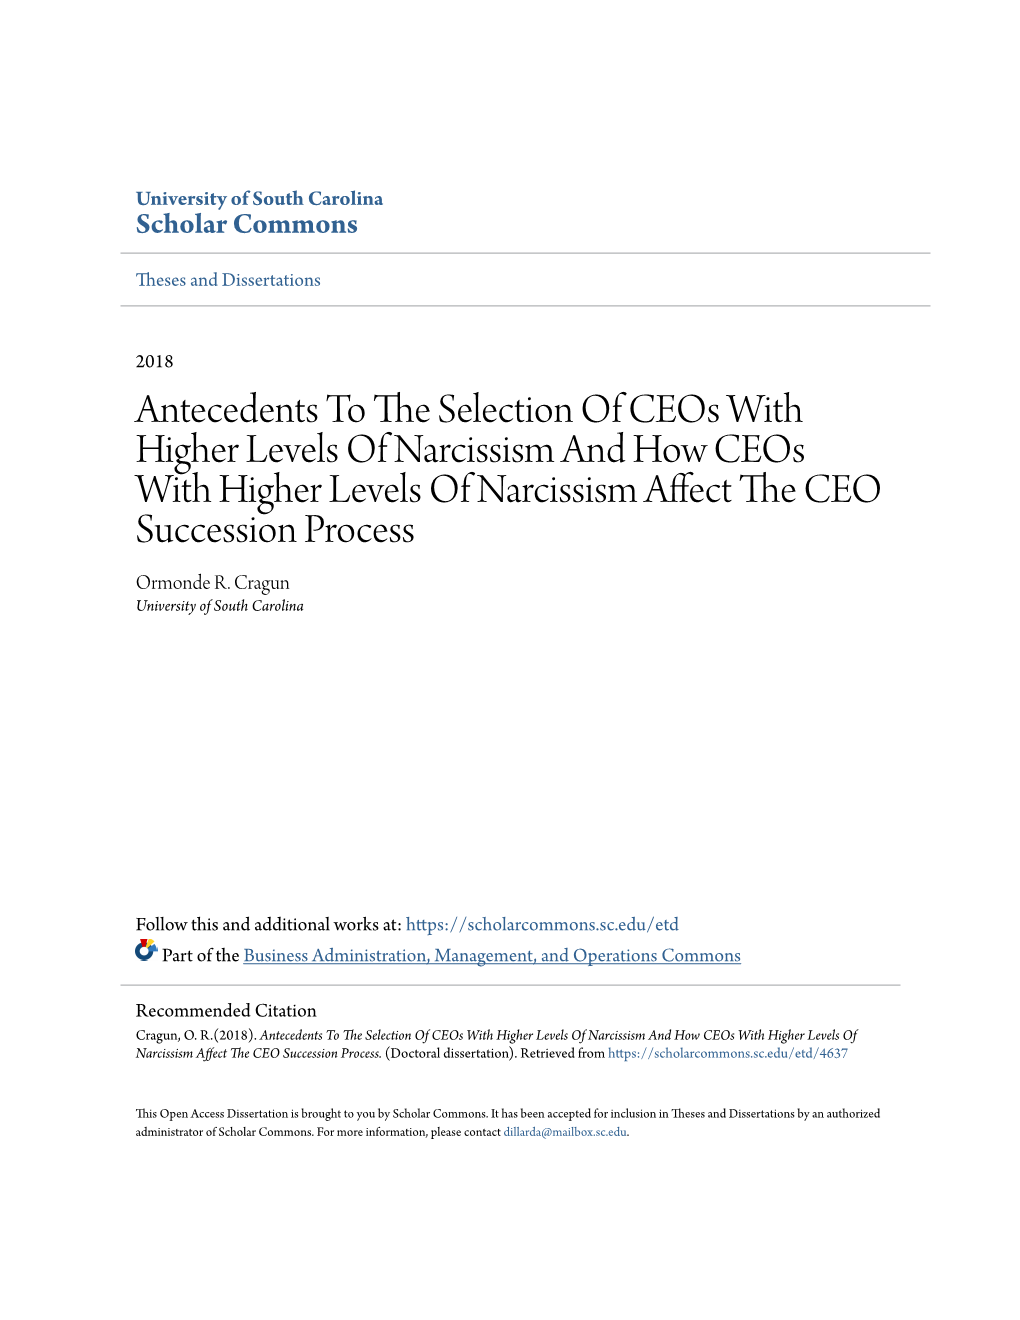 Antecedents to the Selection of Ceos with Higher Levels of Narcissism and How Ceos with Higher Levels of Narcissism Affect the CEO Succession Process